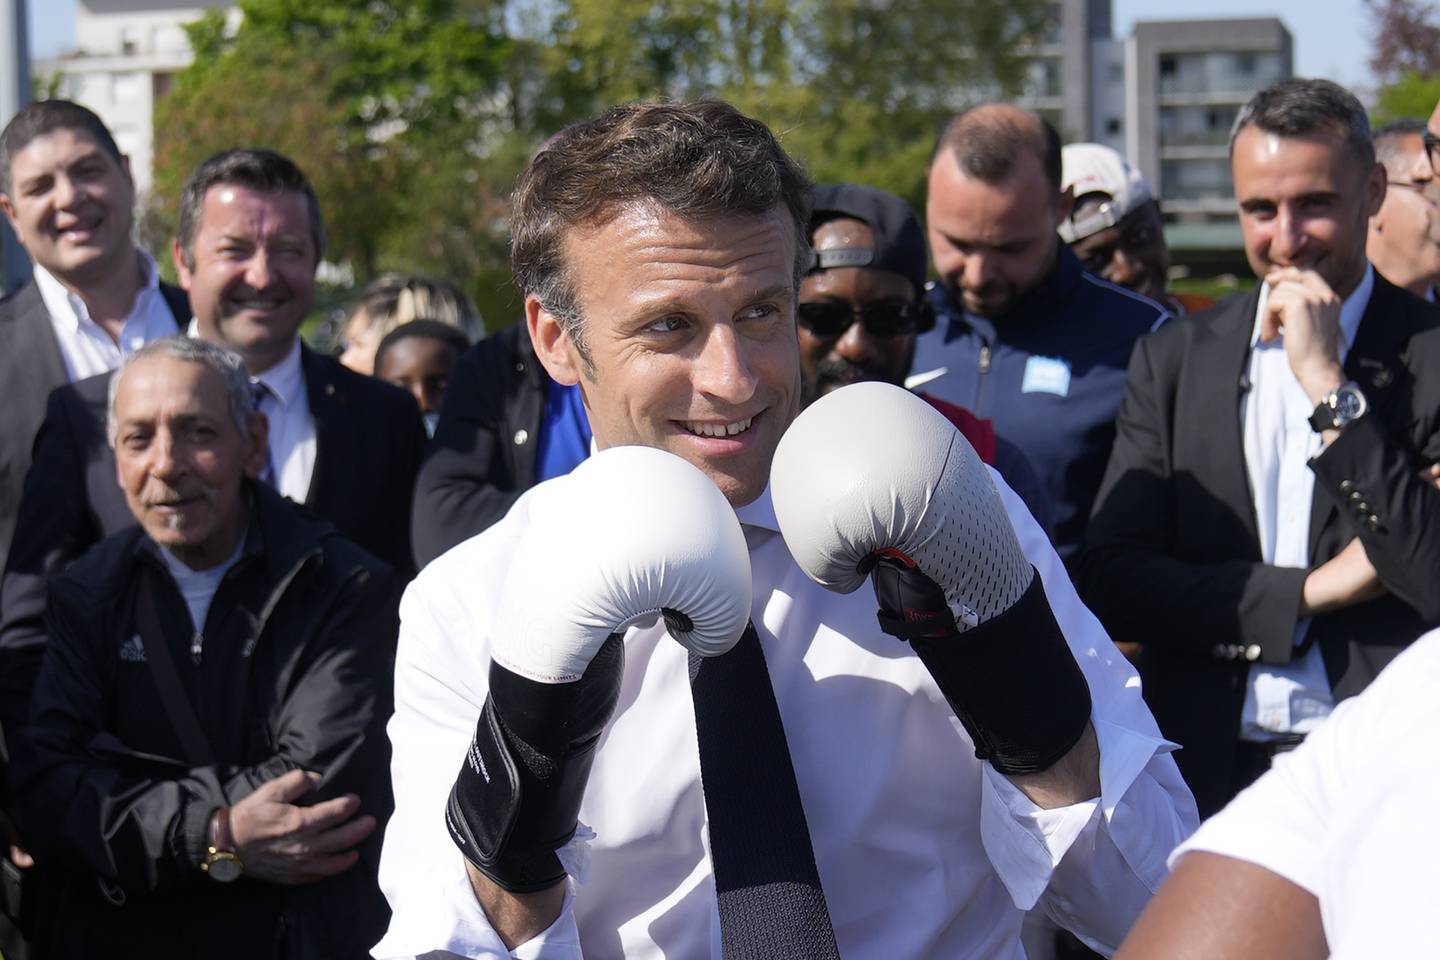 Emmanuel Macron's French presidential campaign appears to pack a punch as he campaigns near Paris. AP Photo